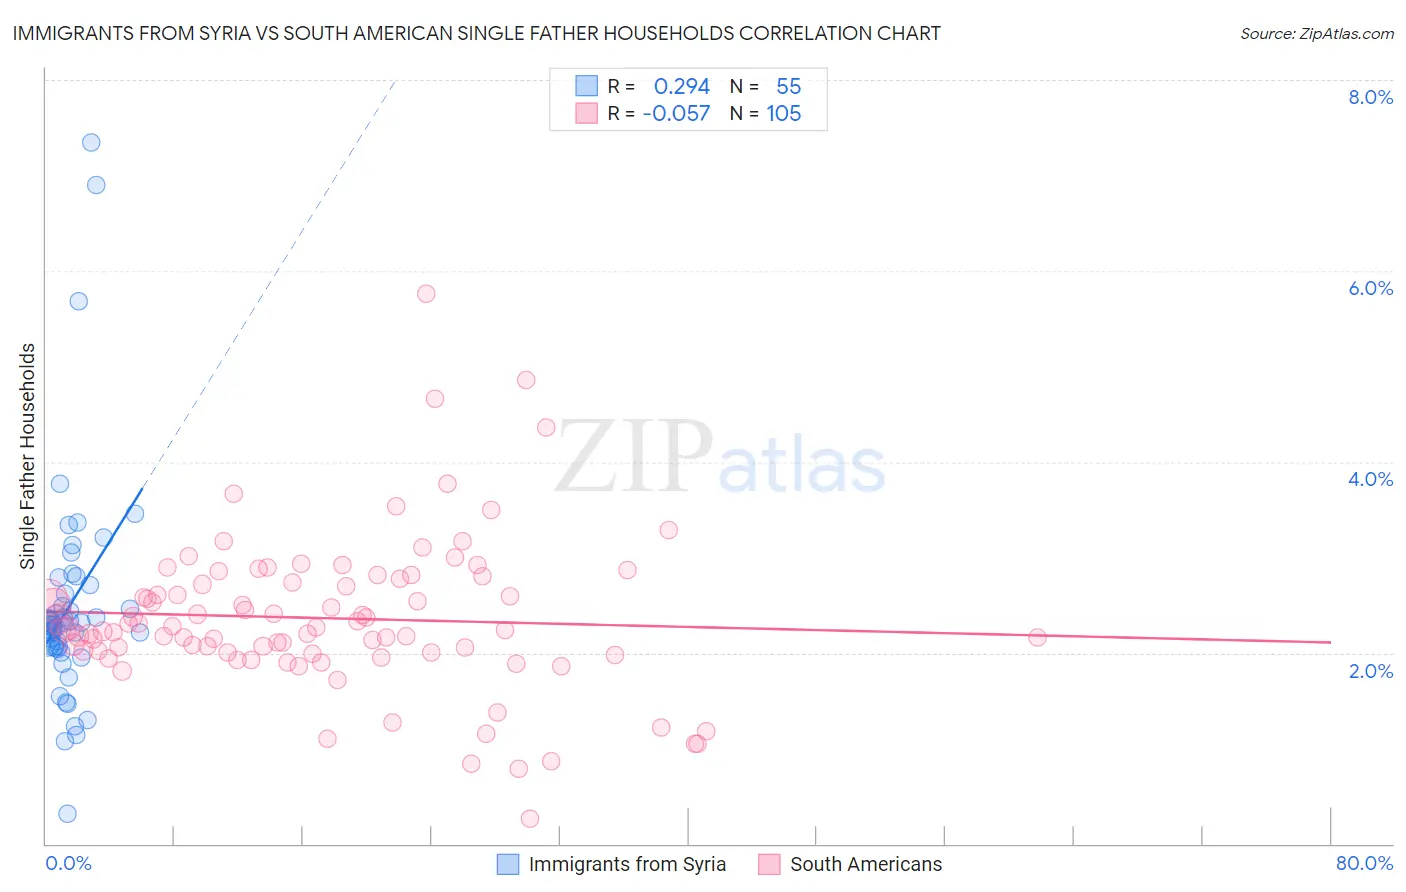 Immigrants from Syria vs South American Single Father Households